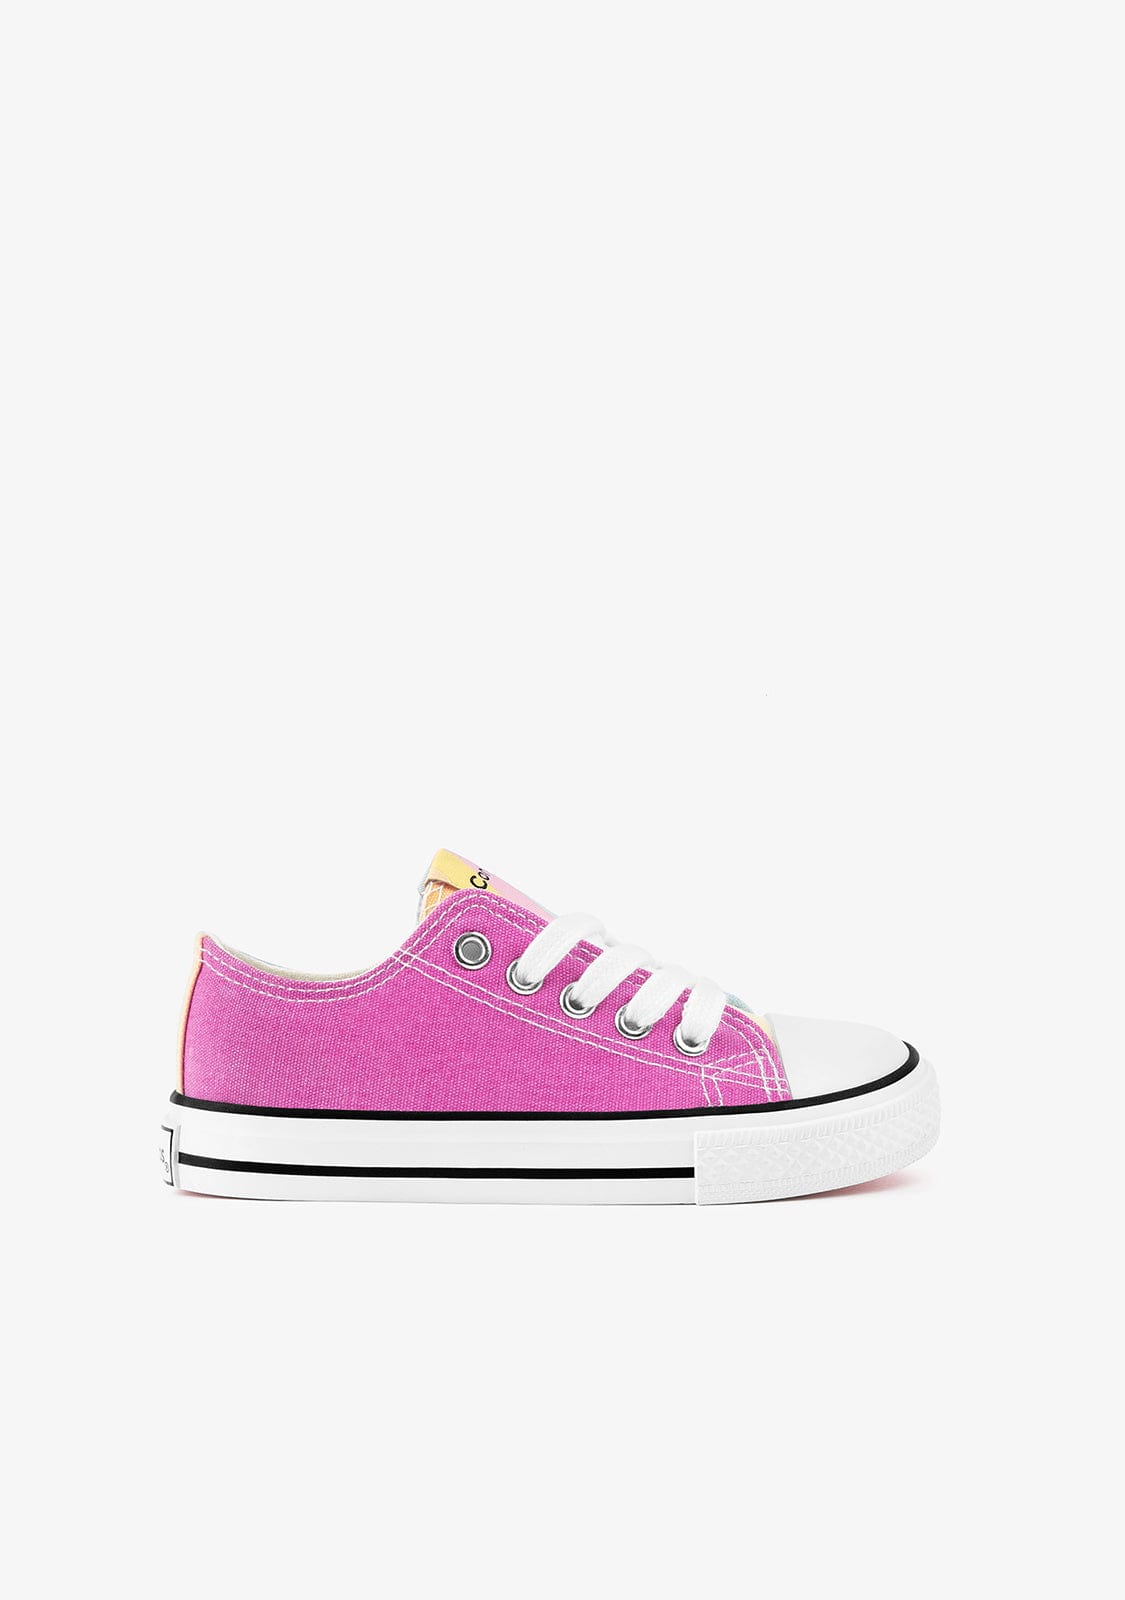 CONGUITOS Shoes Girl's Multicolor Sunlight Sneakers